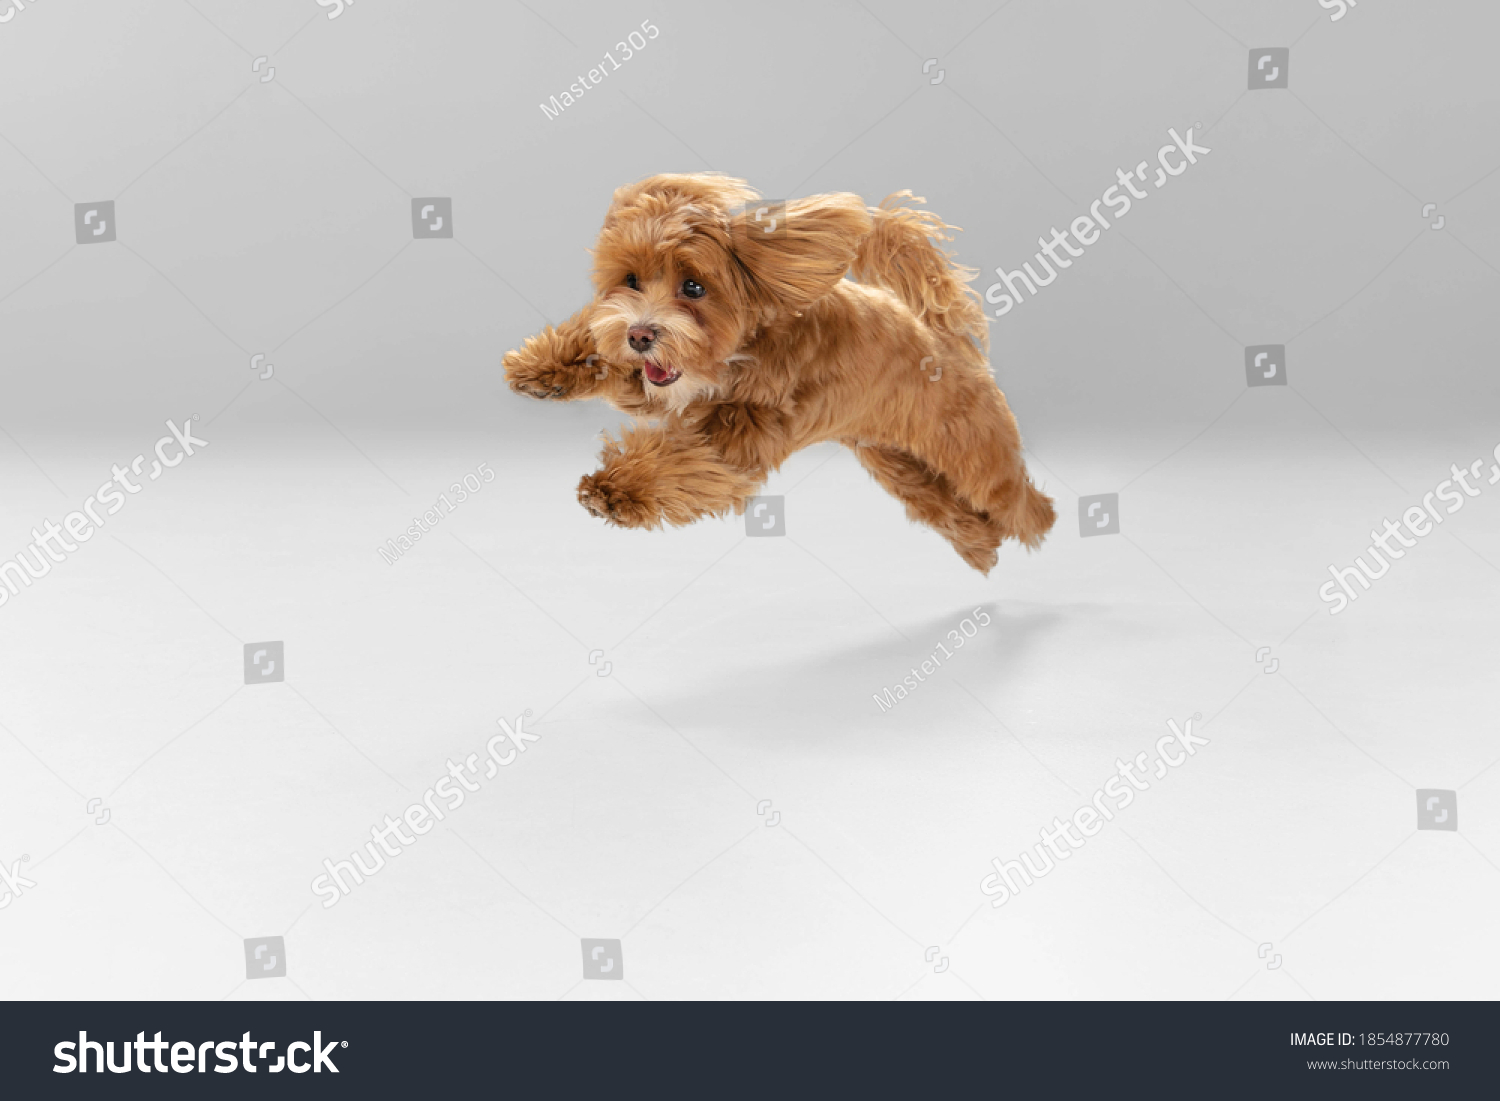 Happiness. Maltipu little dog is posing. Cute playful braun doggy or pet playing on white studio background. Concept of motion, action, movement, pets love. Looks happy, delighted, funny. #1854877780